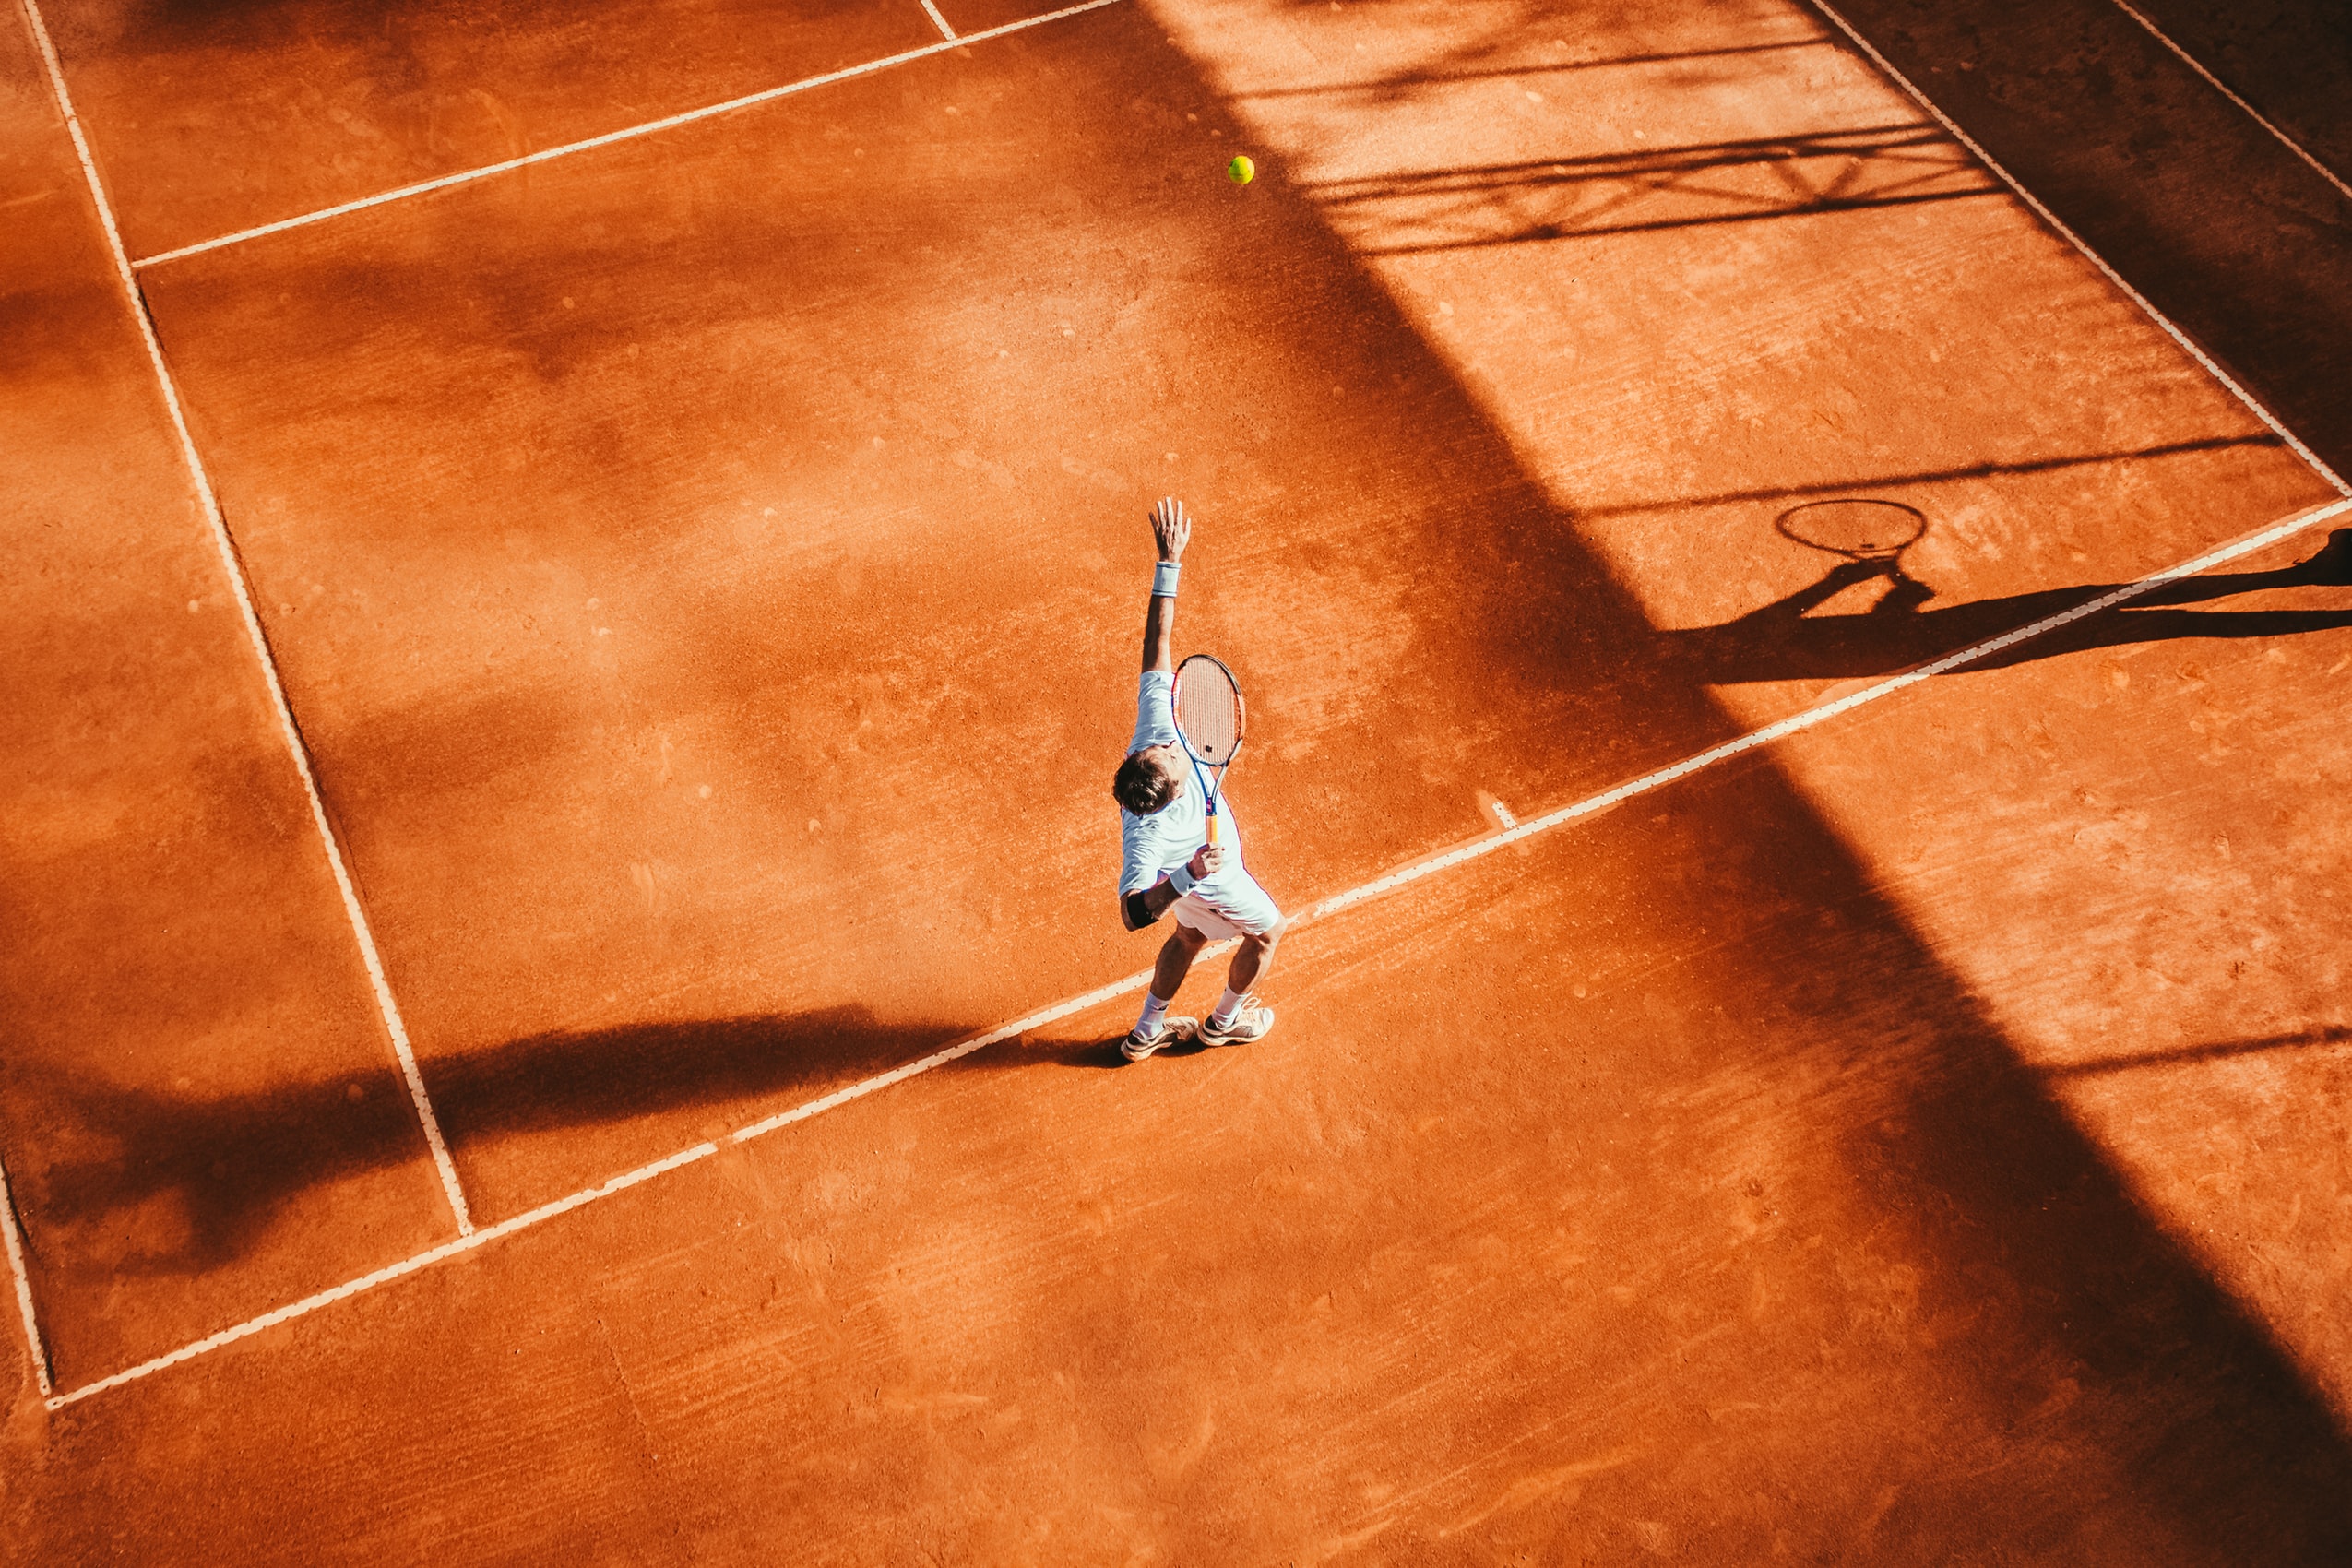 Ace Match, the social tennis competition app